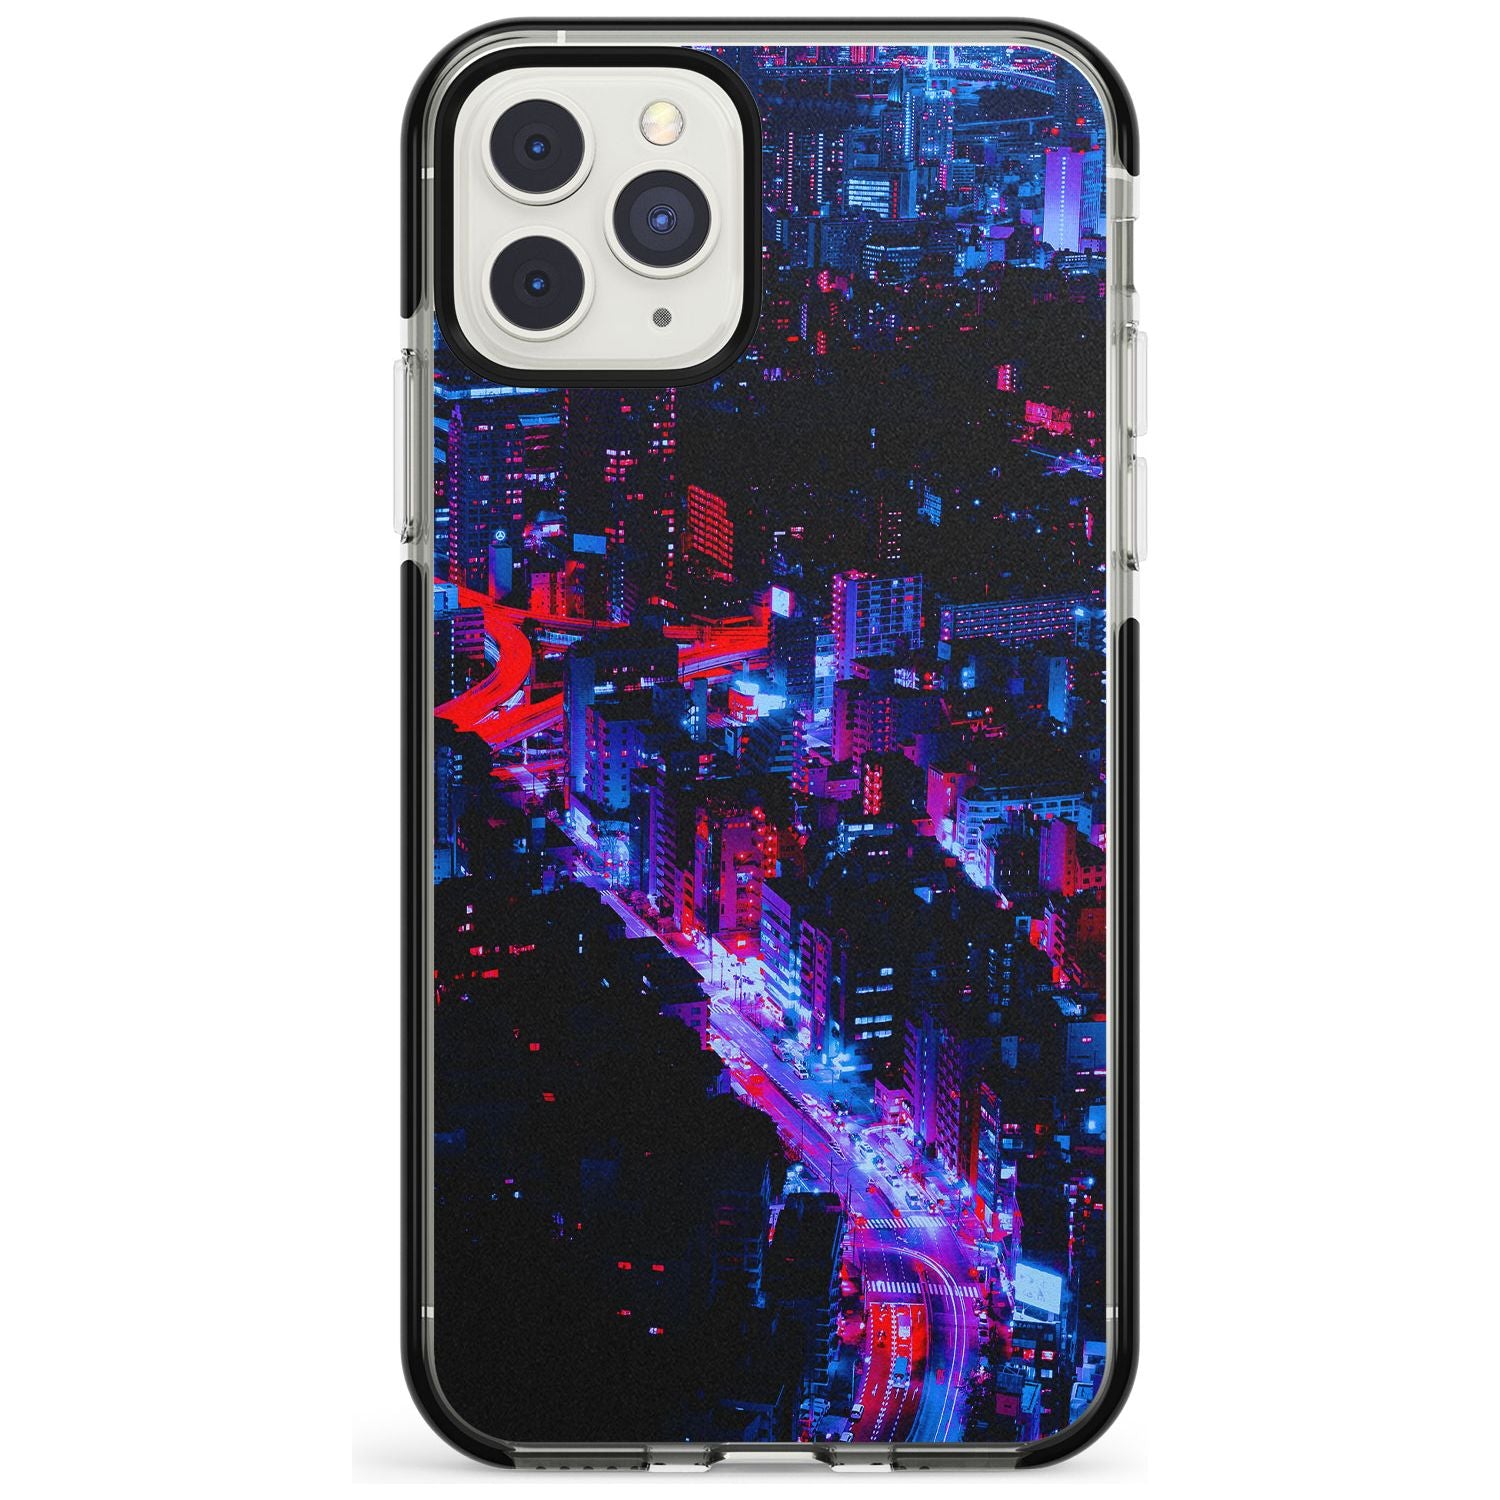 Arial City View - Neon Cities Photographs Black Impact Phone Case for iPhone 11 Pro Max